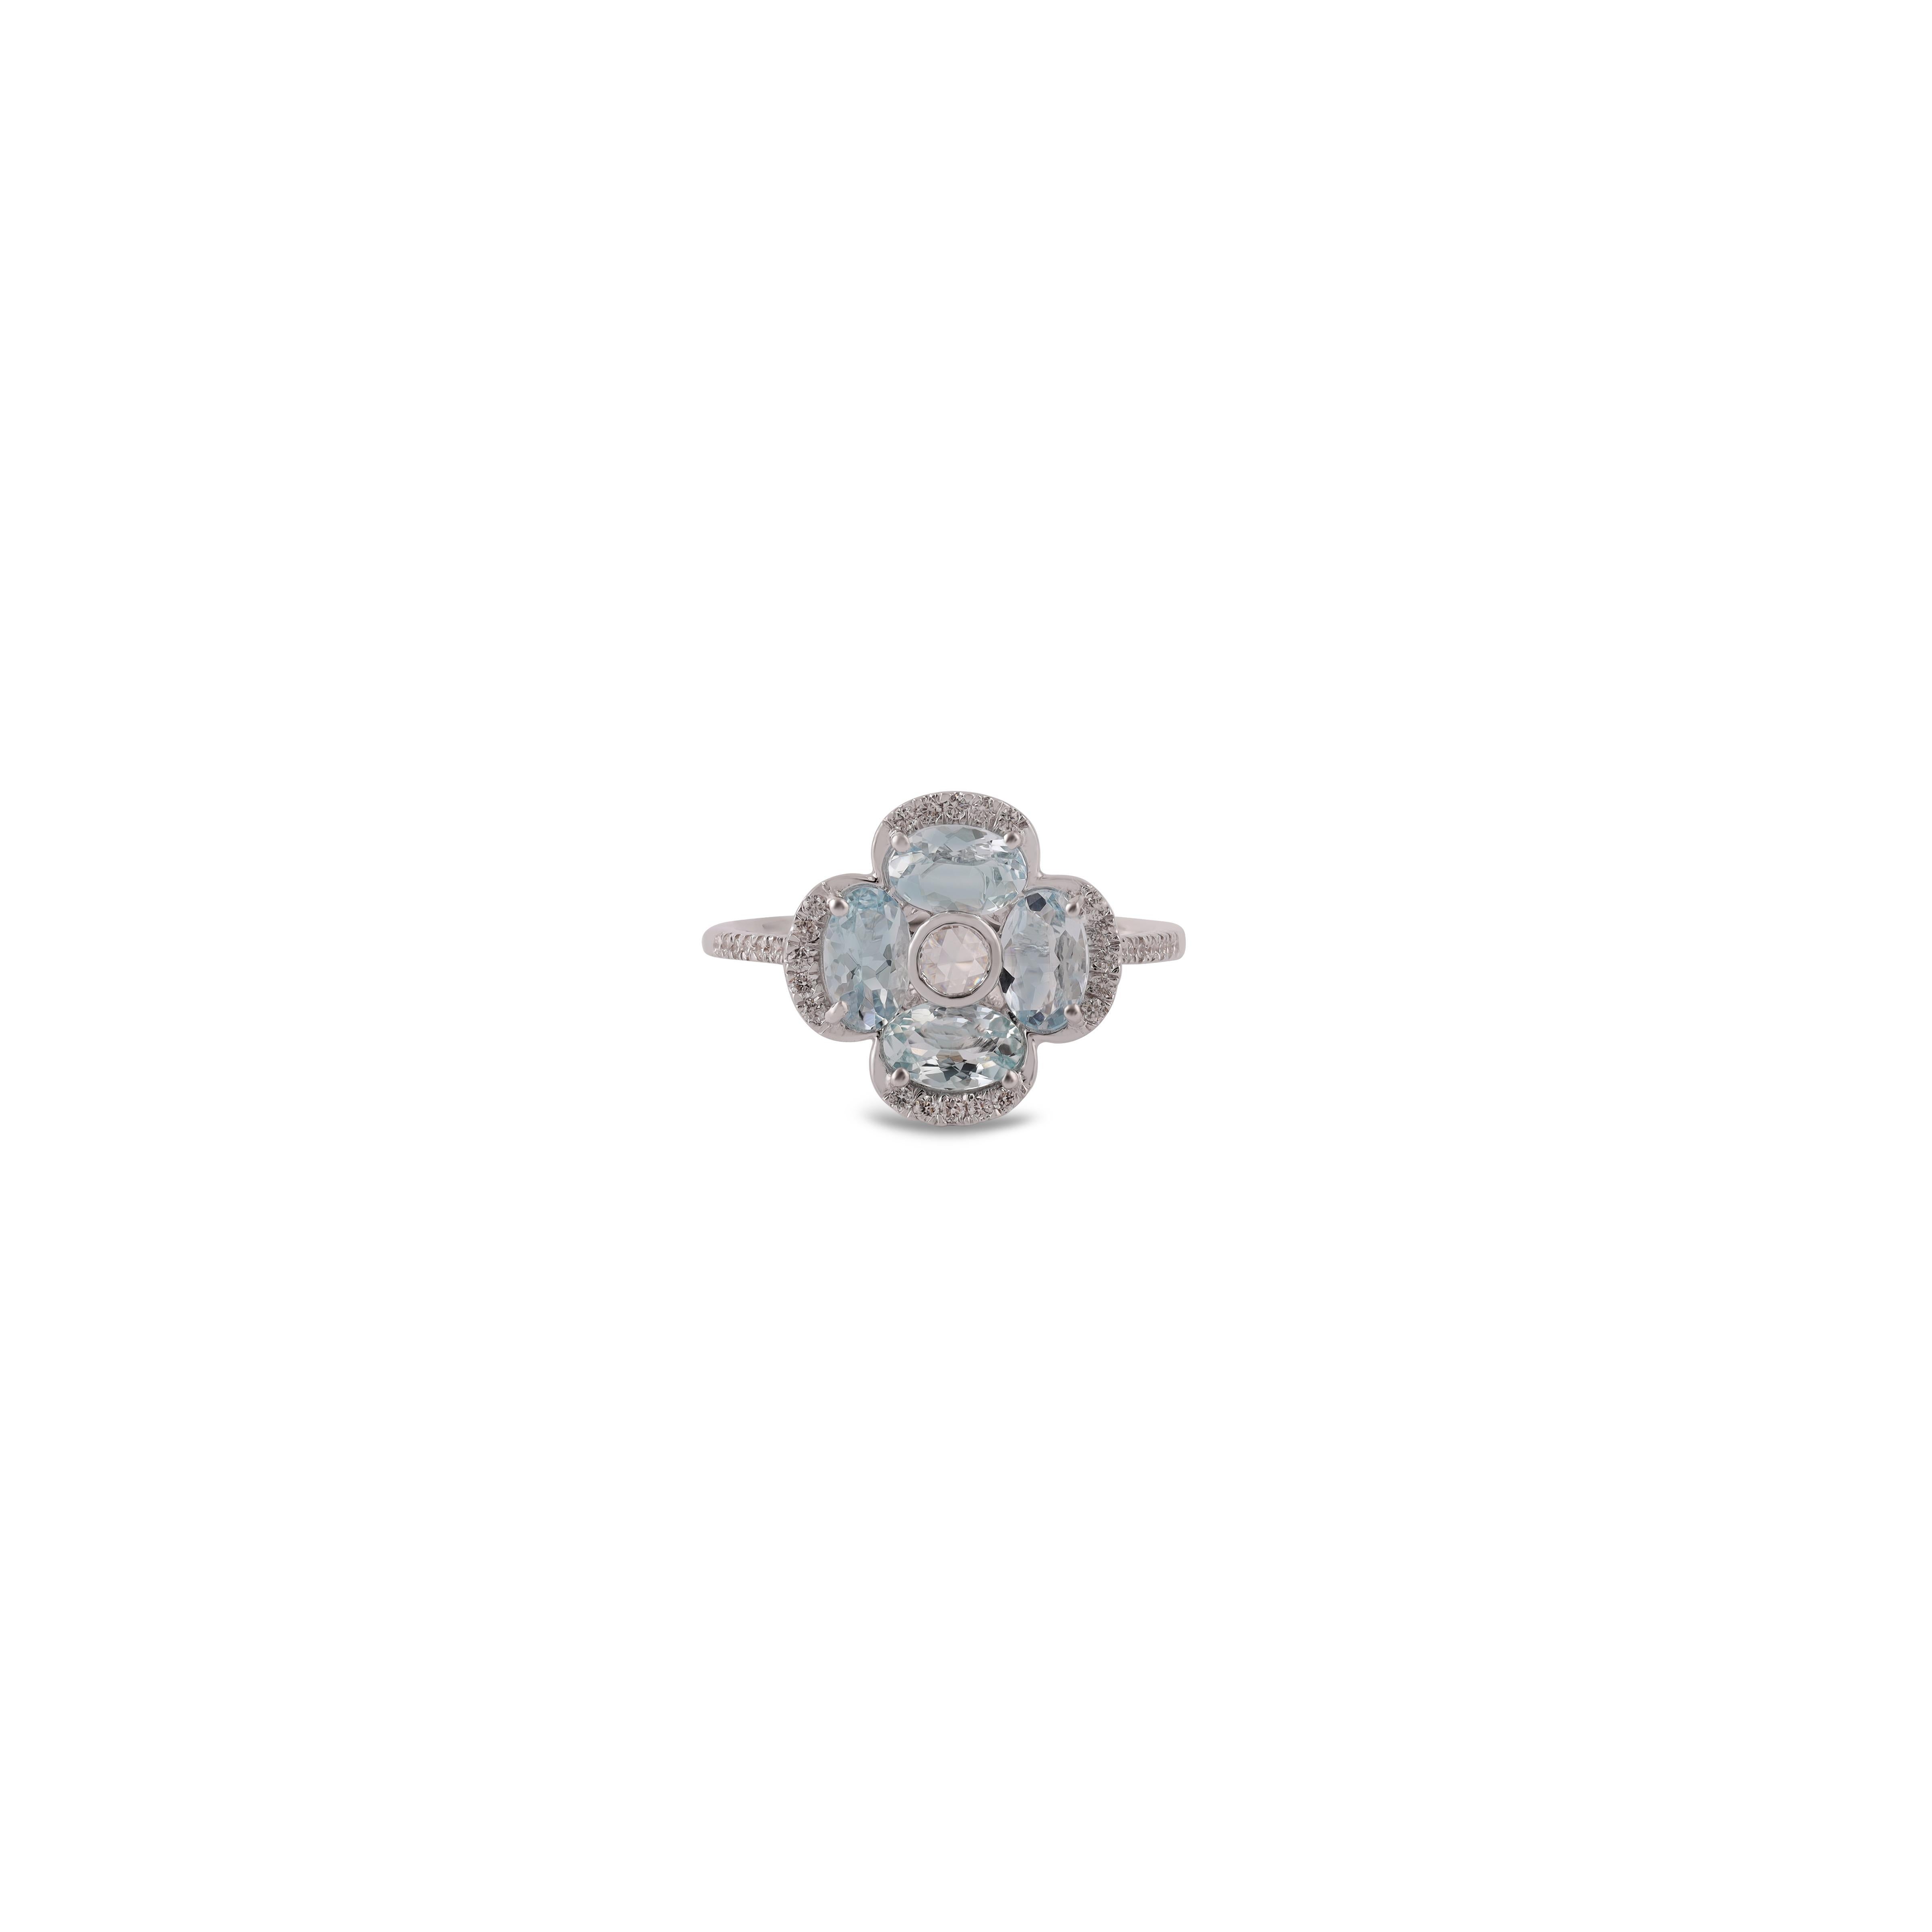 This is an elegant Aquamarine & diamond ring studded in 18k White gold features a fine quality of Oval-shaped Aquamarine 1.08 carats with 1 Diamond 0.05 carats, Diamond 0.19 Carat this entire ring is made in 18k White gold weight 3.06 grams, it is a